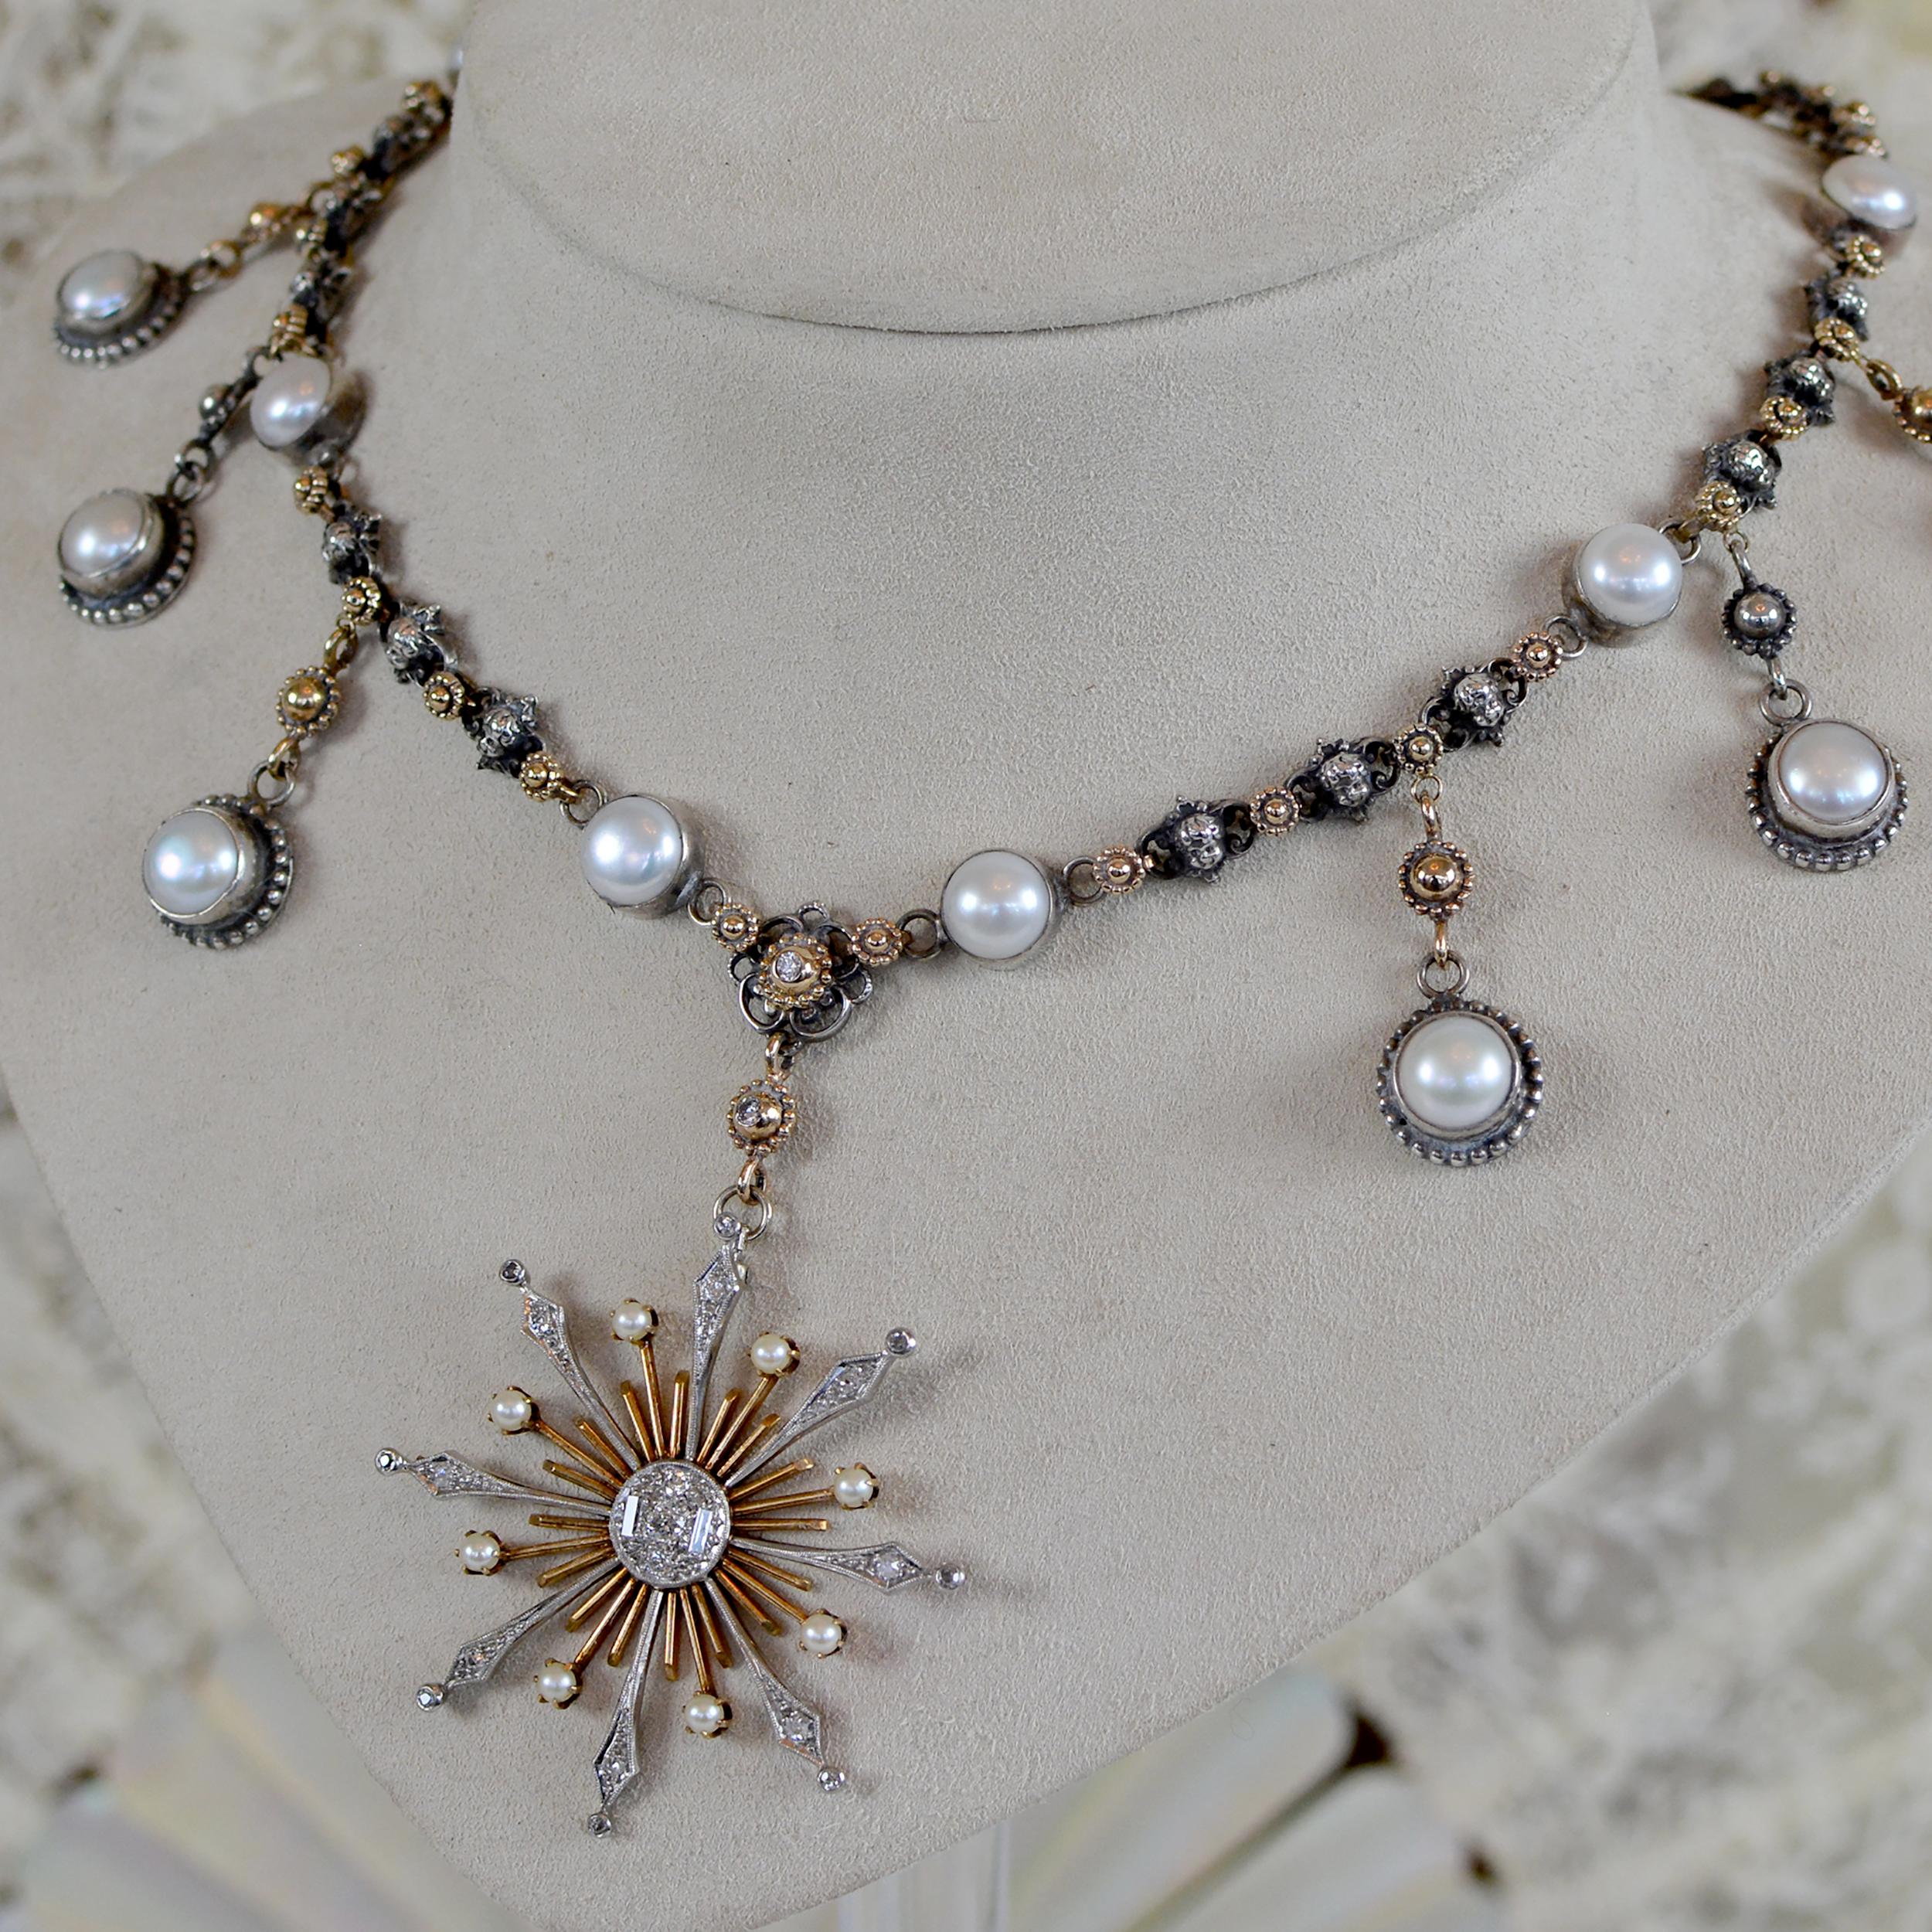 Jill Garber Diamond and Pearl Starburst Drop Necklace - 14 kt. Gold and Silver For Sale 1